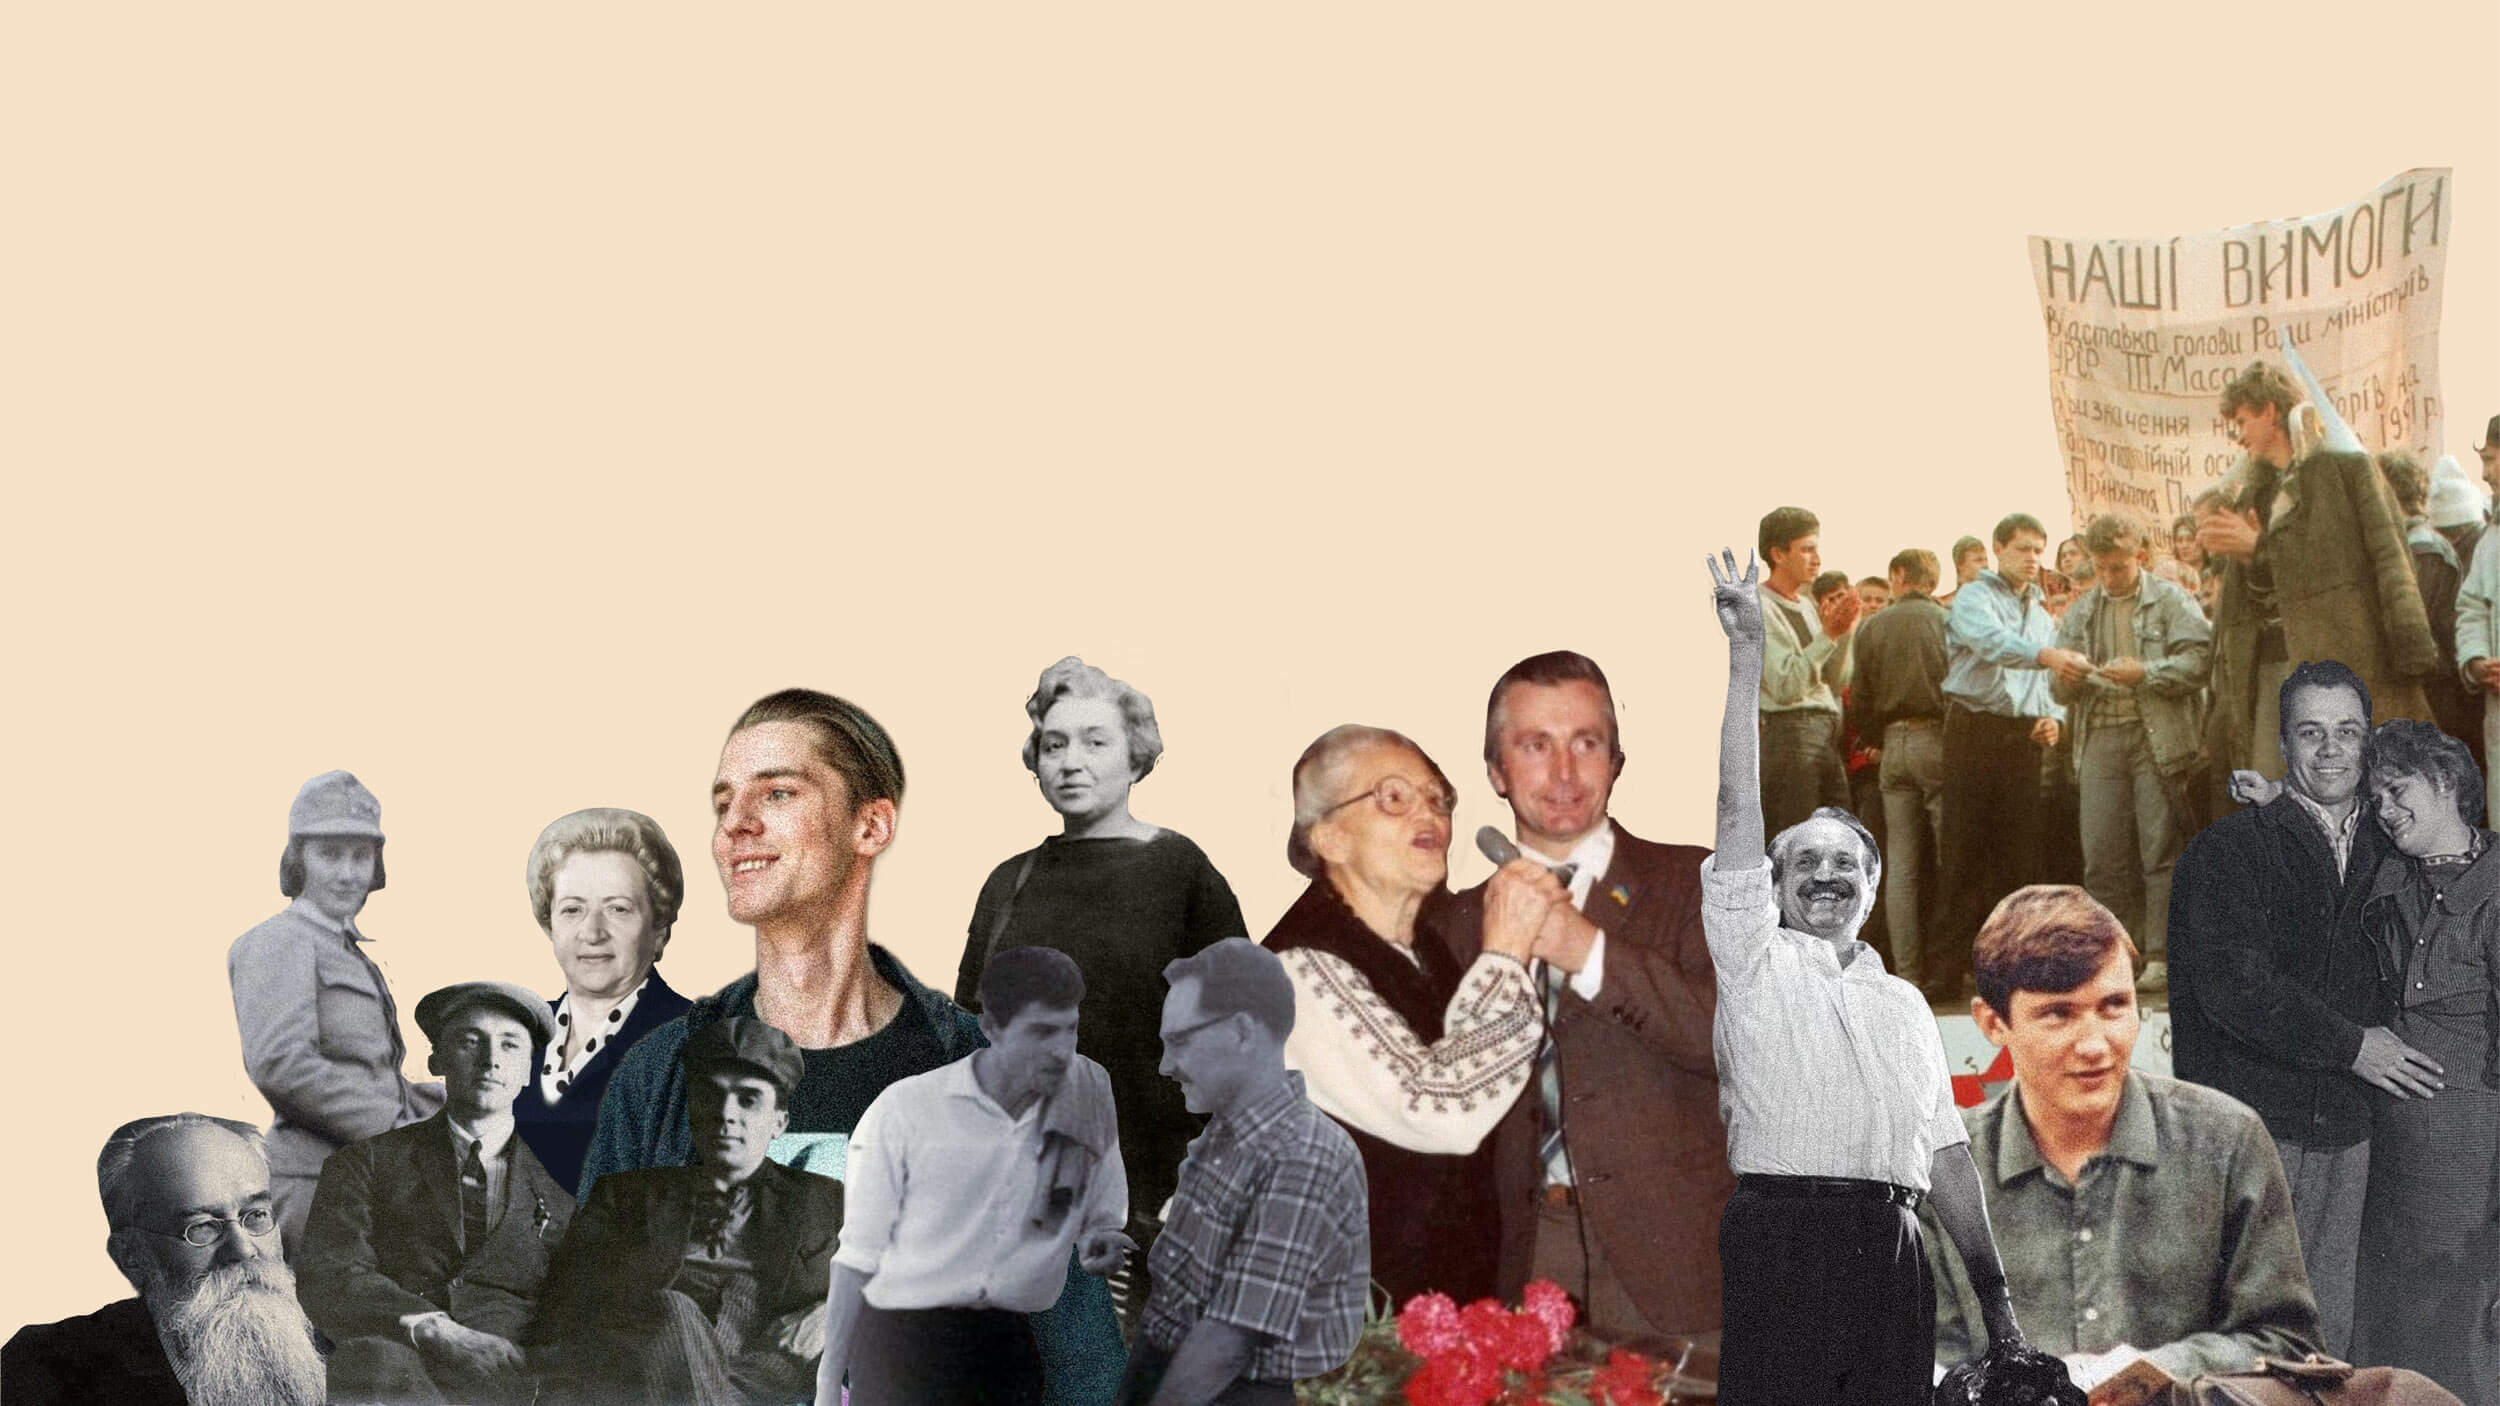 project image: "Because of them: the history of Ukrainians". Collage of important historical figures from Ukraine.